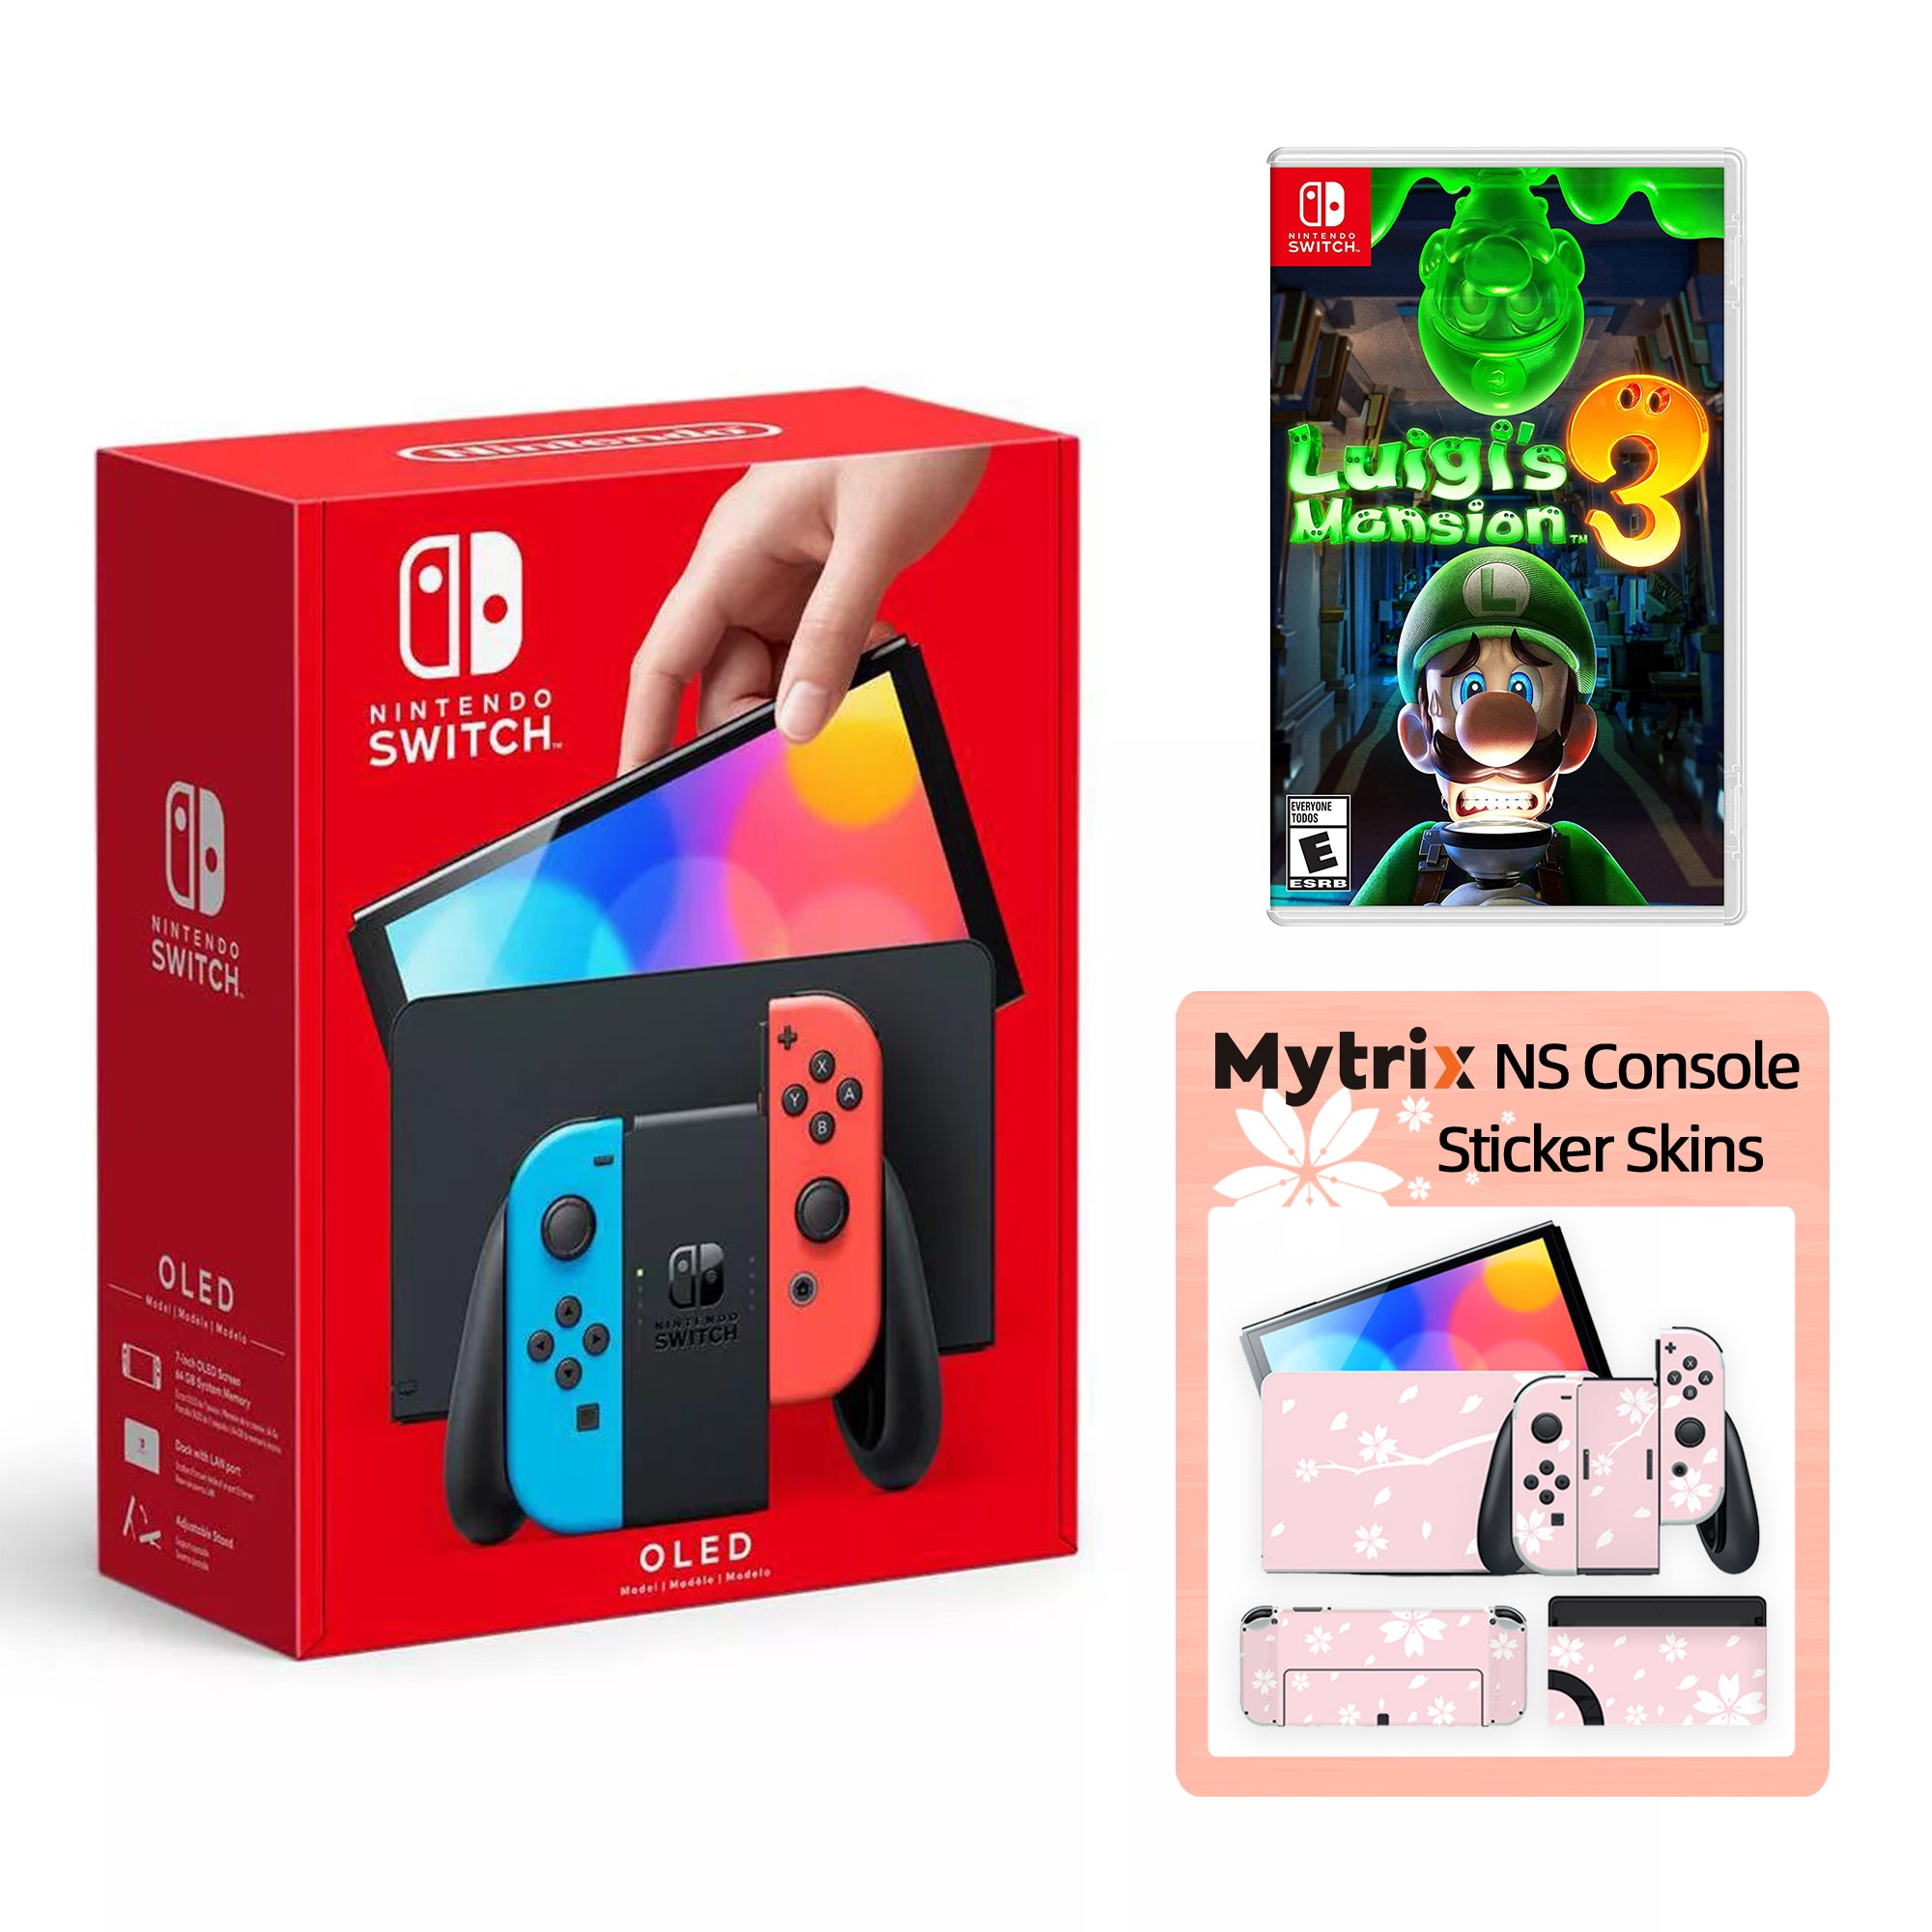 2022 New Nintendo Switch OLED Model Neon Red Blue with Luigi's Mansion 3 and Mytrix Full Body Skin Sticker for NS OLED Console, Dock and Joycons - Sakura Pink